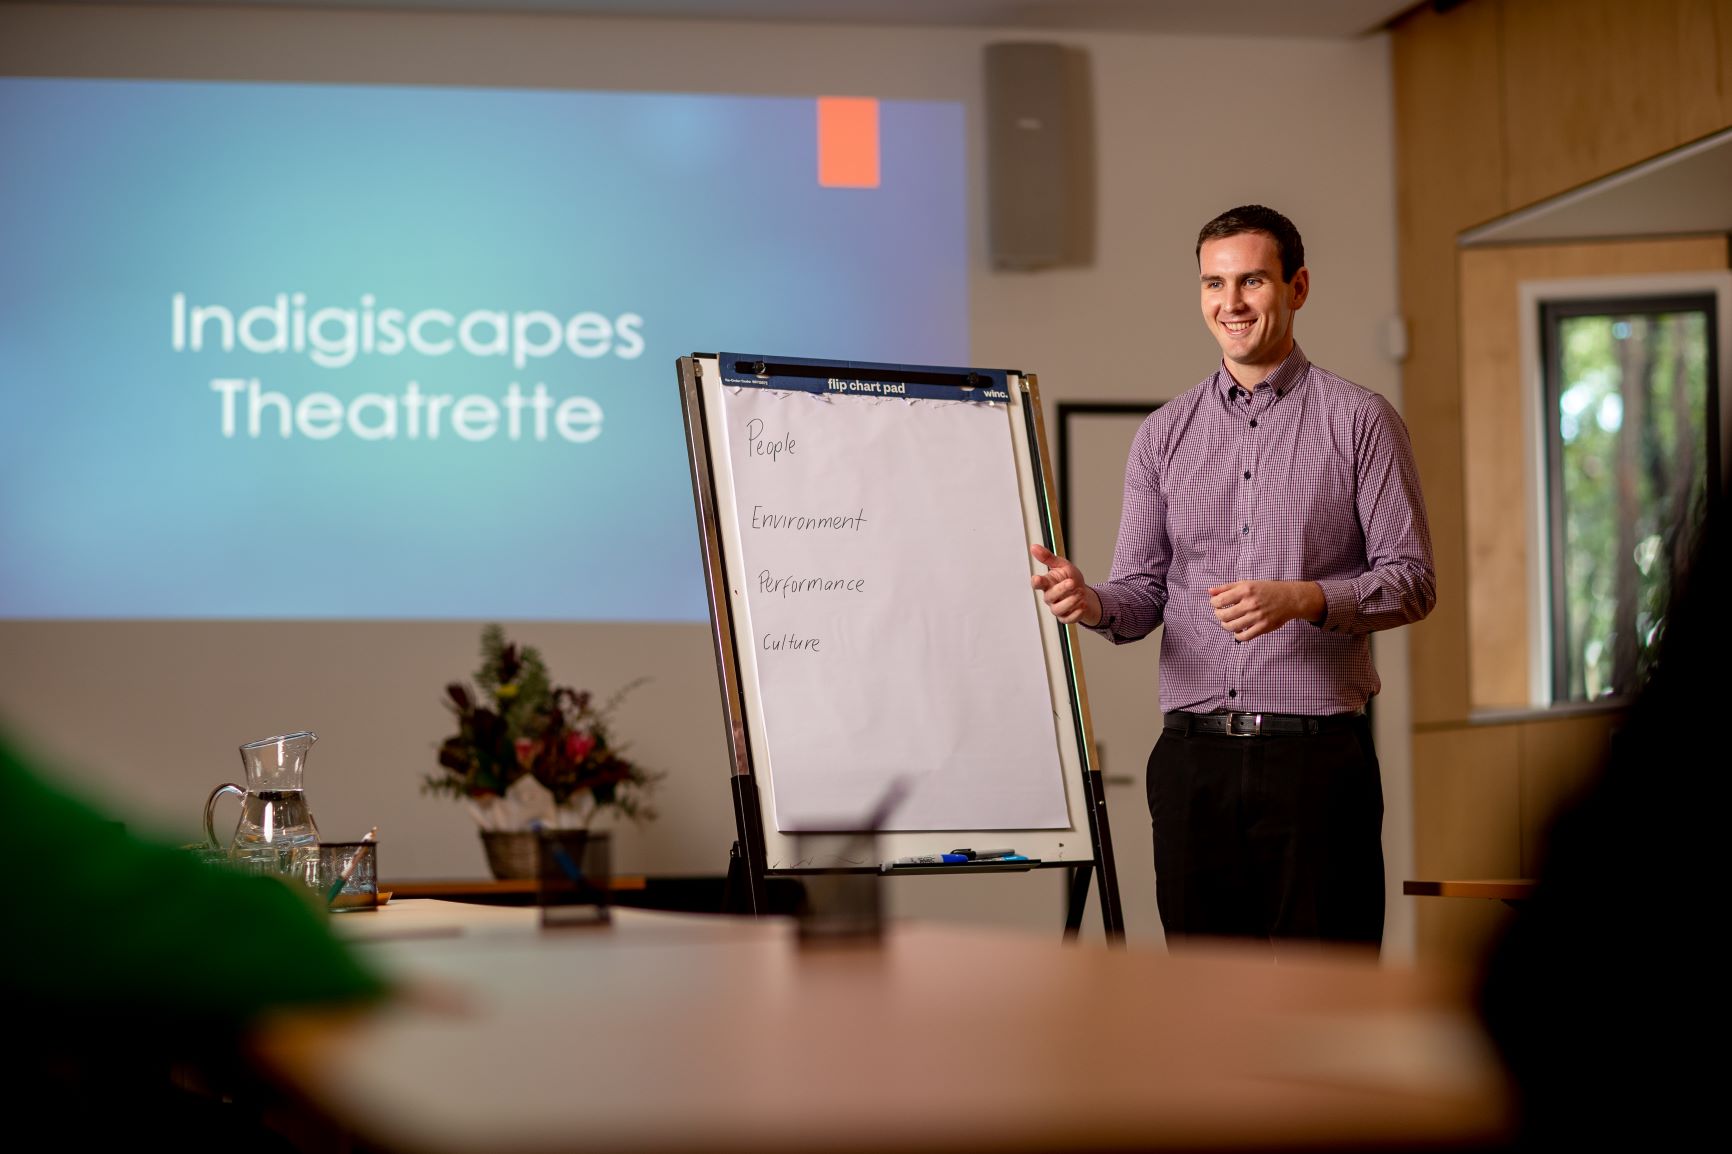 A man standing in front of a flip chart talking to people in a room.